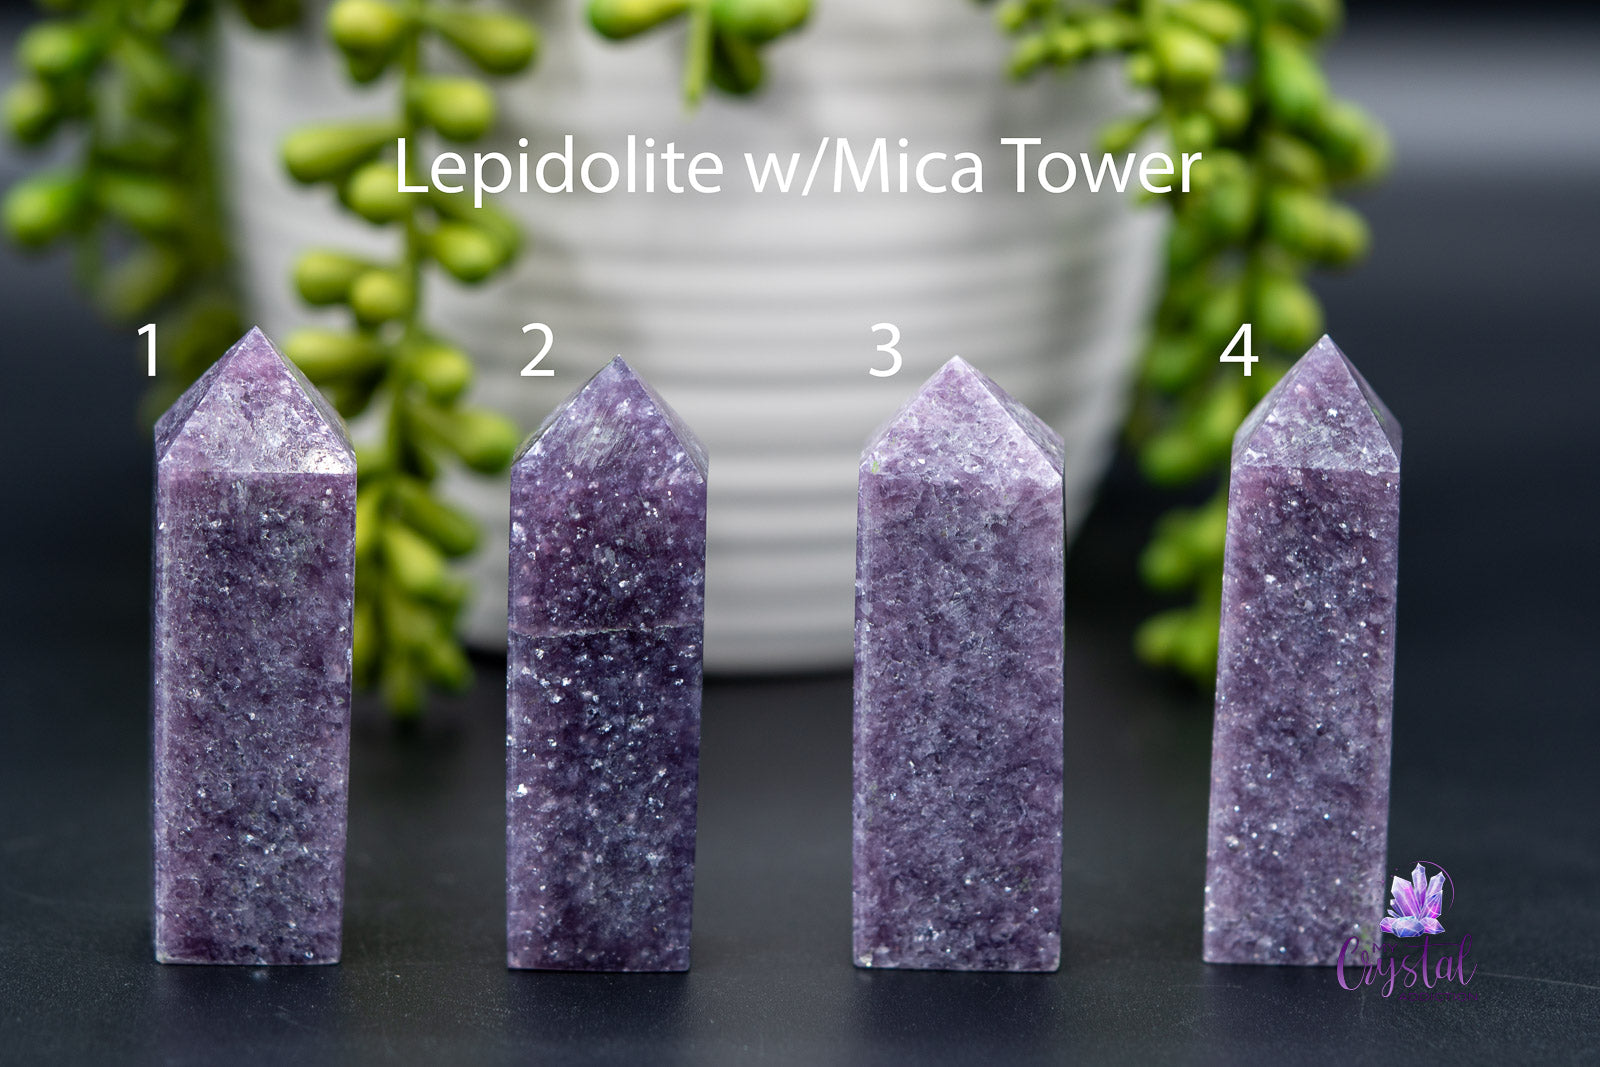 Lepidolite w/Mica Towers 2.2"-3.3"/56mm-85mm - My Crystal Addiction